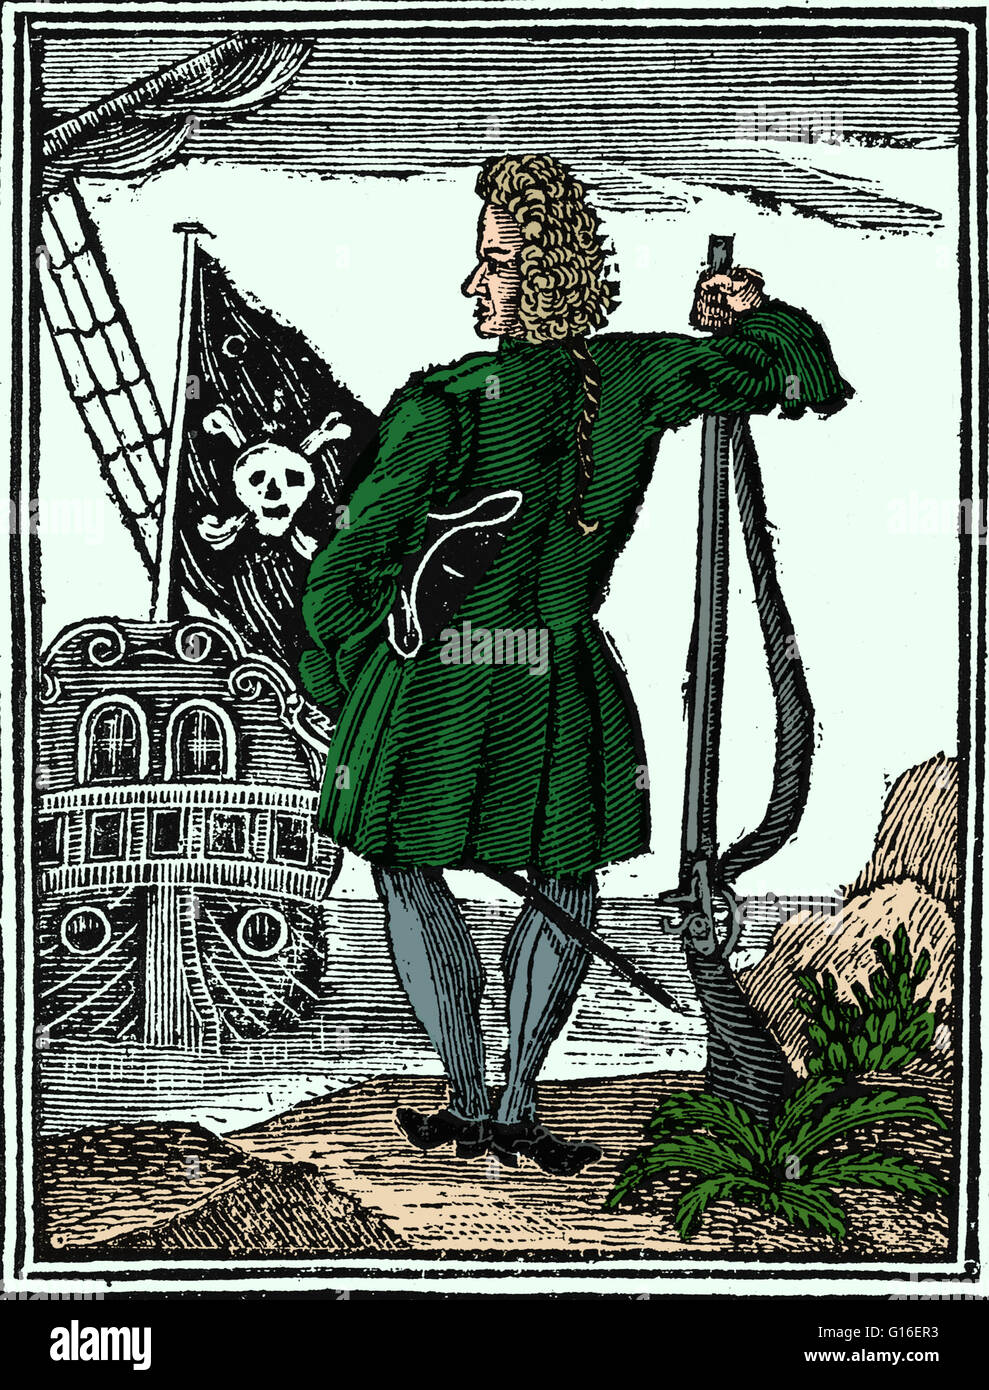 Colorized engraving of Stede Bonnet from 'A General History of the Robberies and Murders of the most notorious Pirates', 1725 edition. Stede Bonnet (1688 - December 10,1718) was an English pirate born in Barbados. He was nicknamed 'the gentleman pirate', Stock Photo